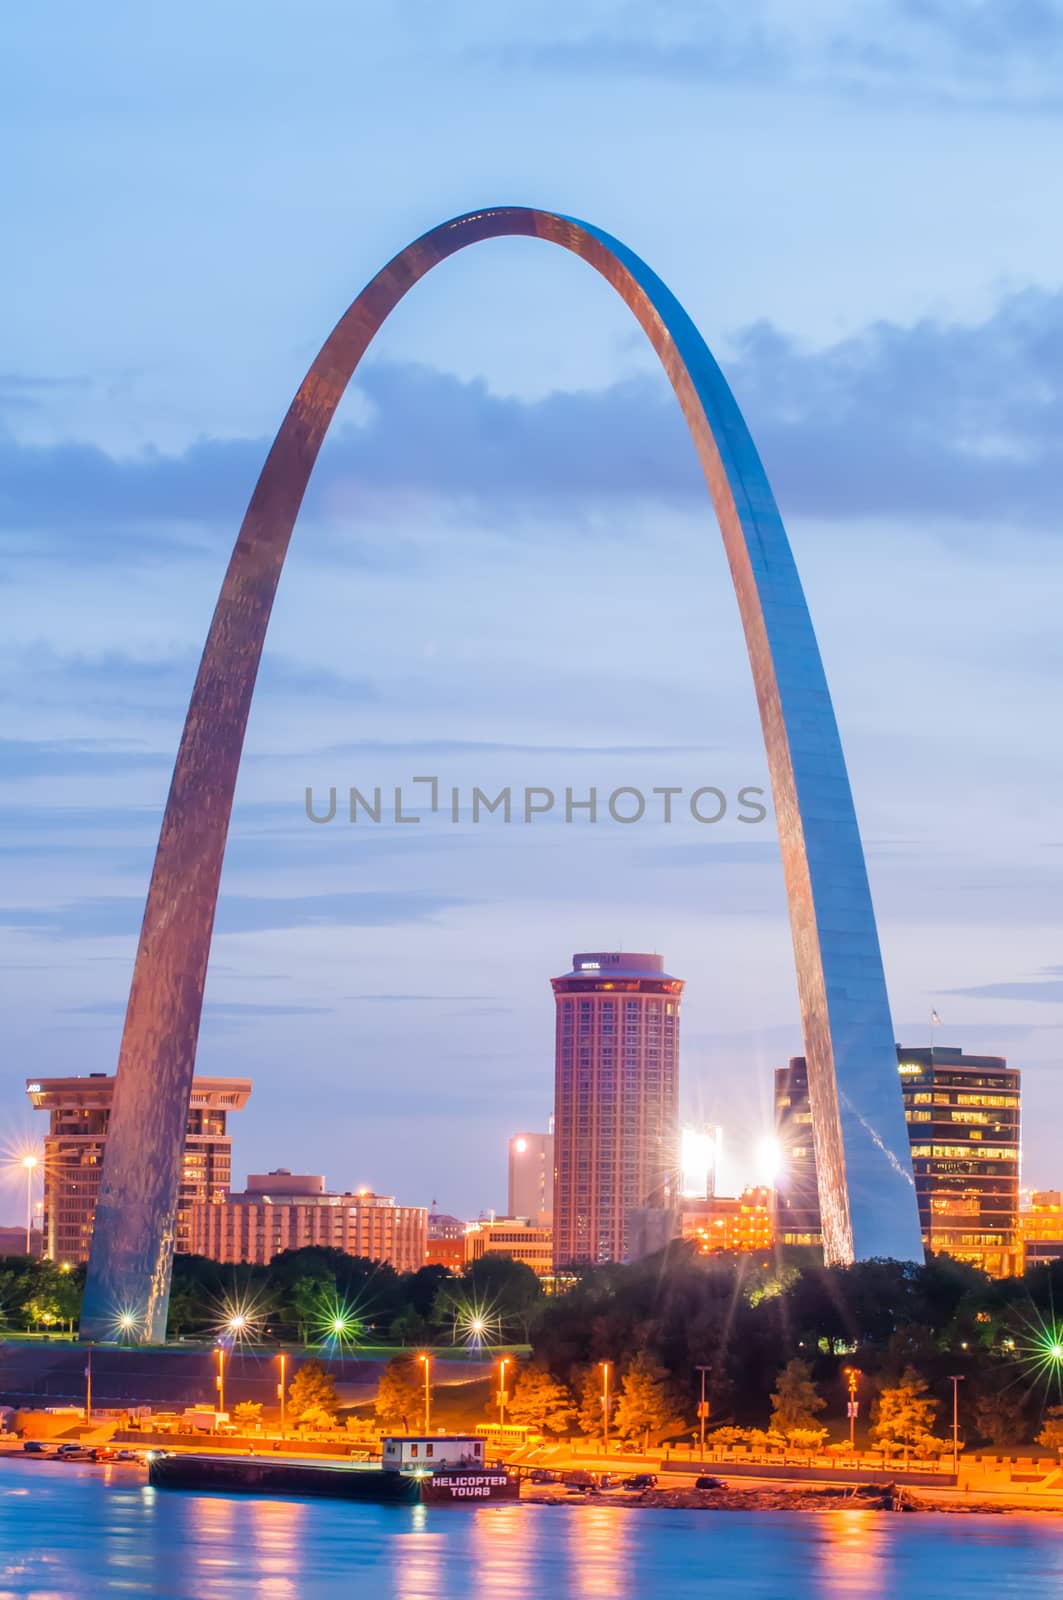 City of St. Louis skyline. Image of St. Louis downtown with Gate by digidreamgrafix